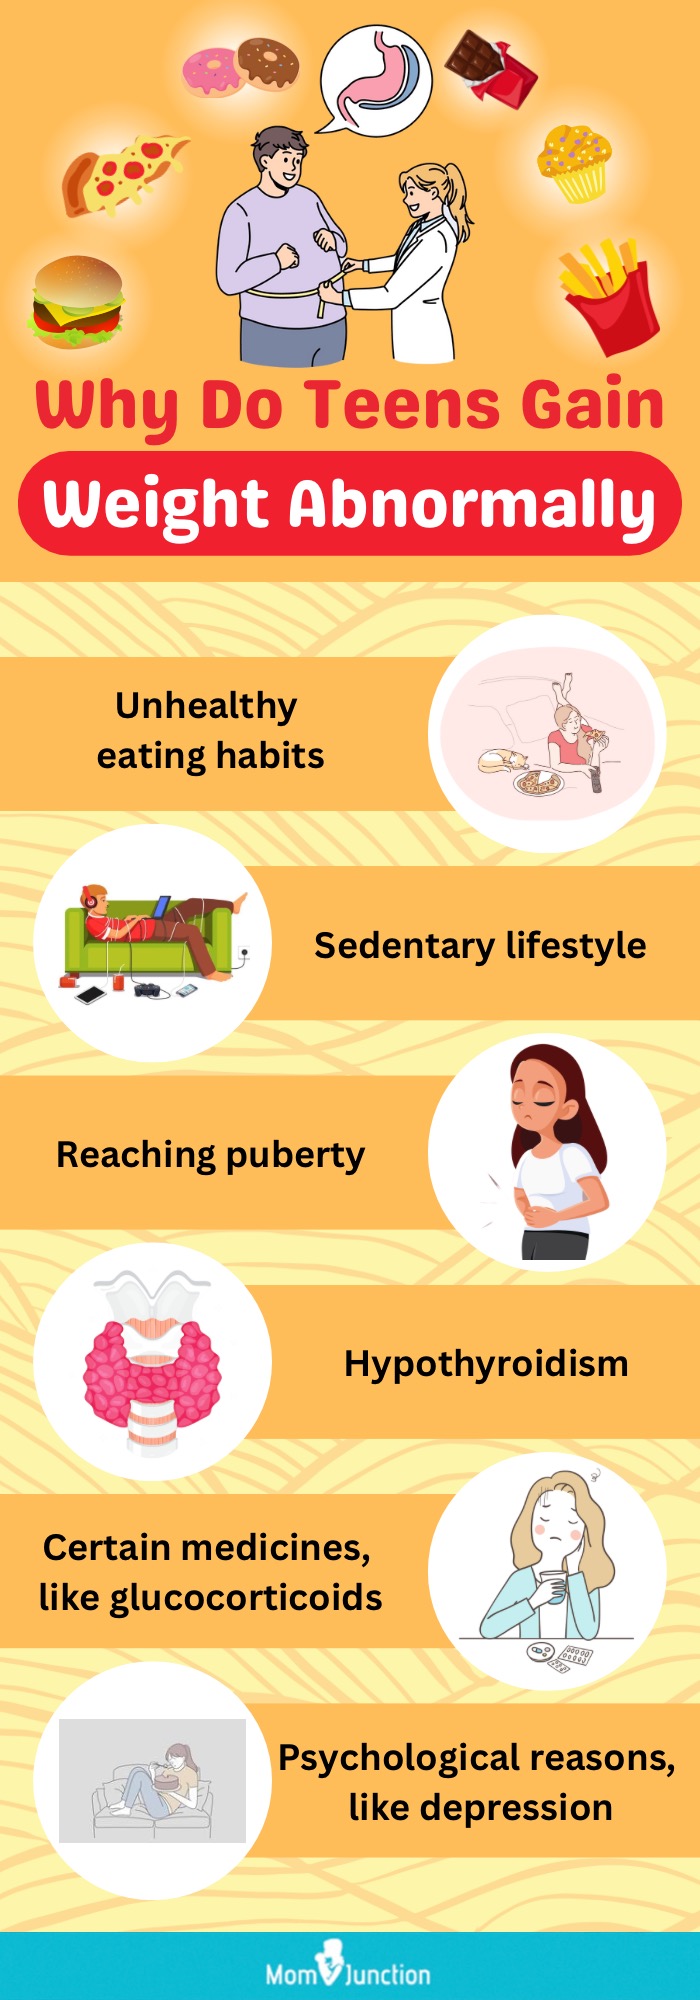 causes of abnormal weight gain in teenagers (infographic)